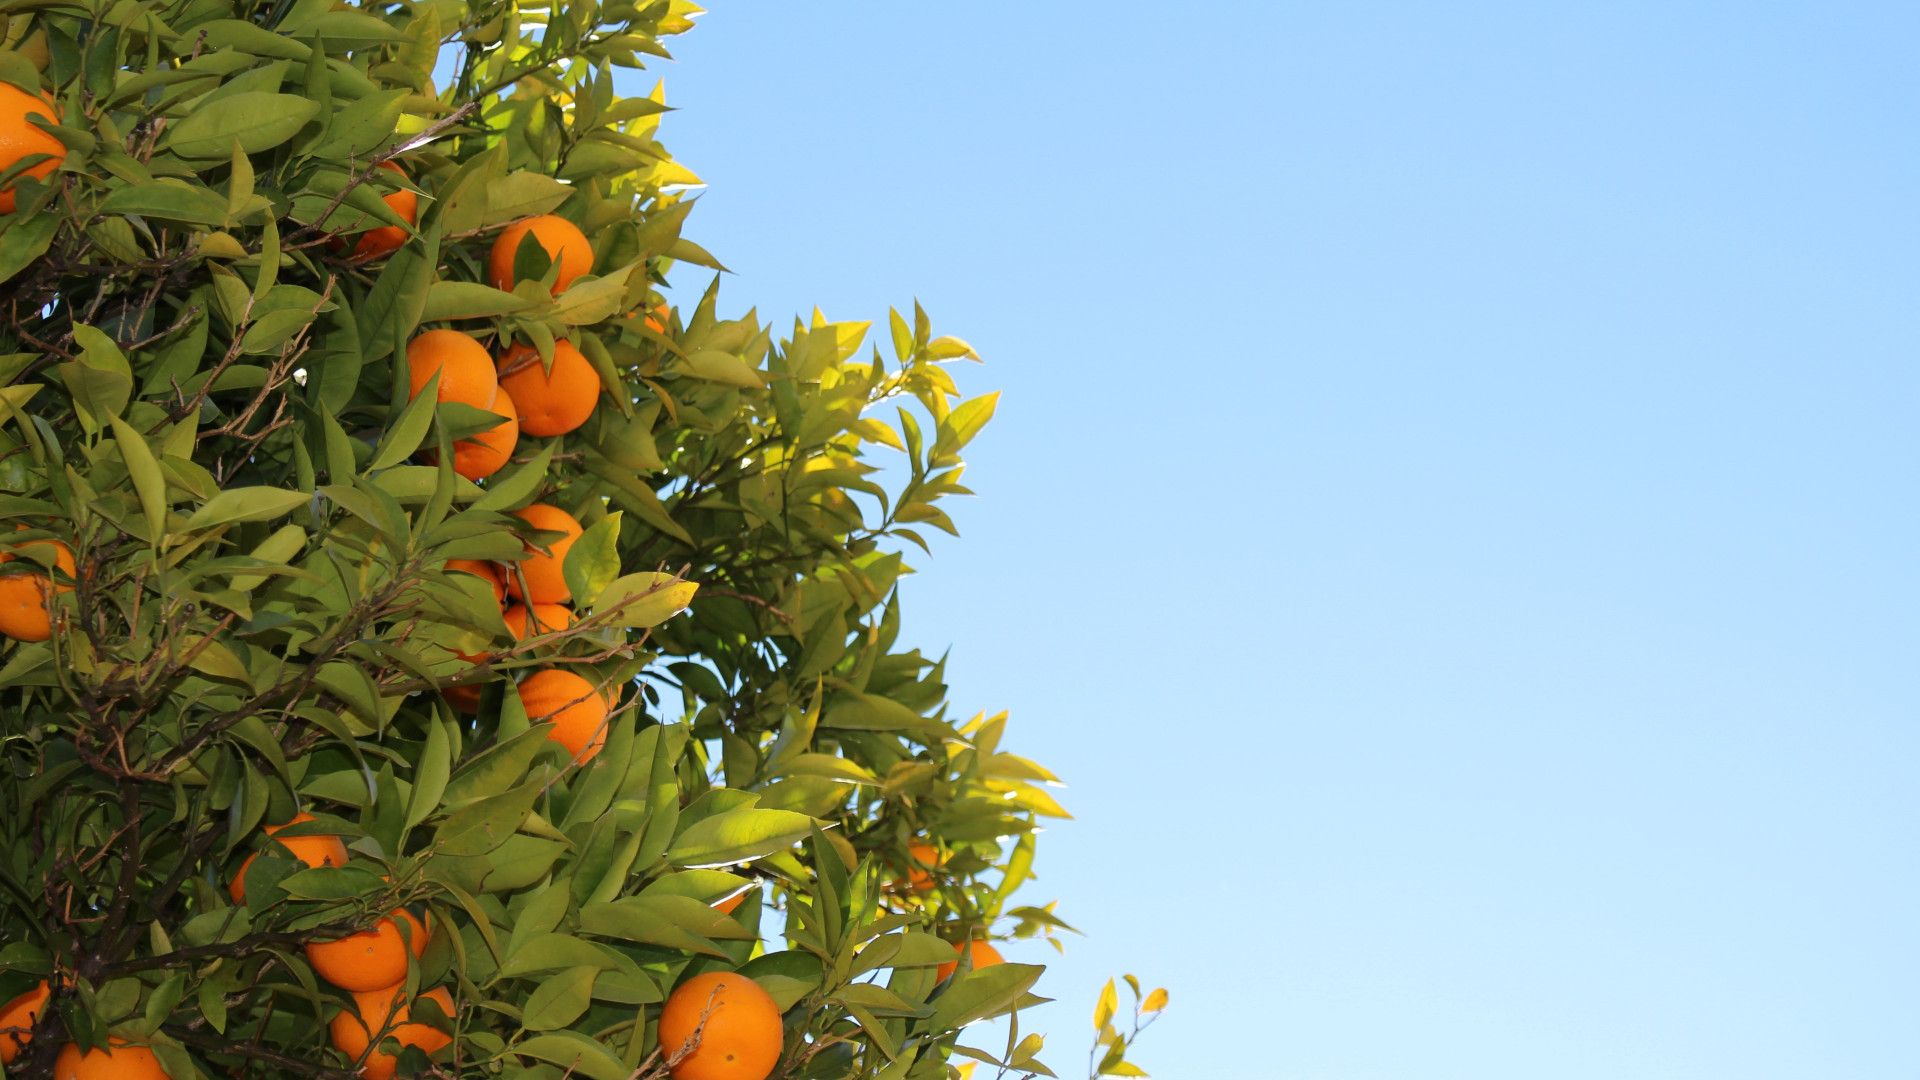 Oranges or clementines in tree wallpaper 1920x1080